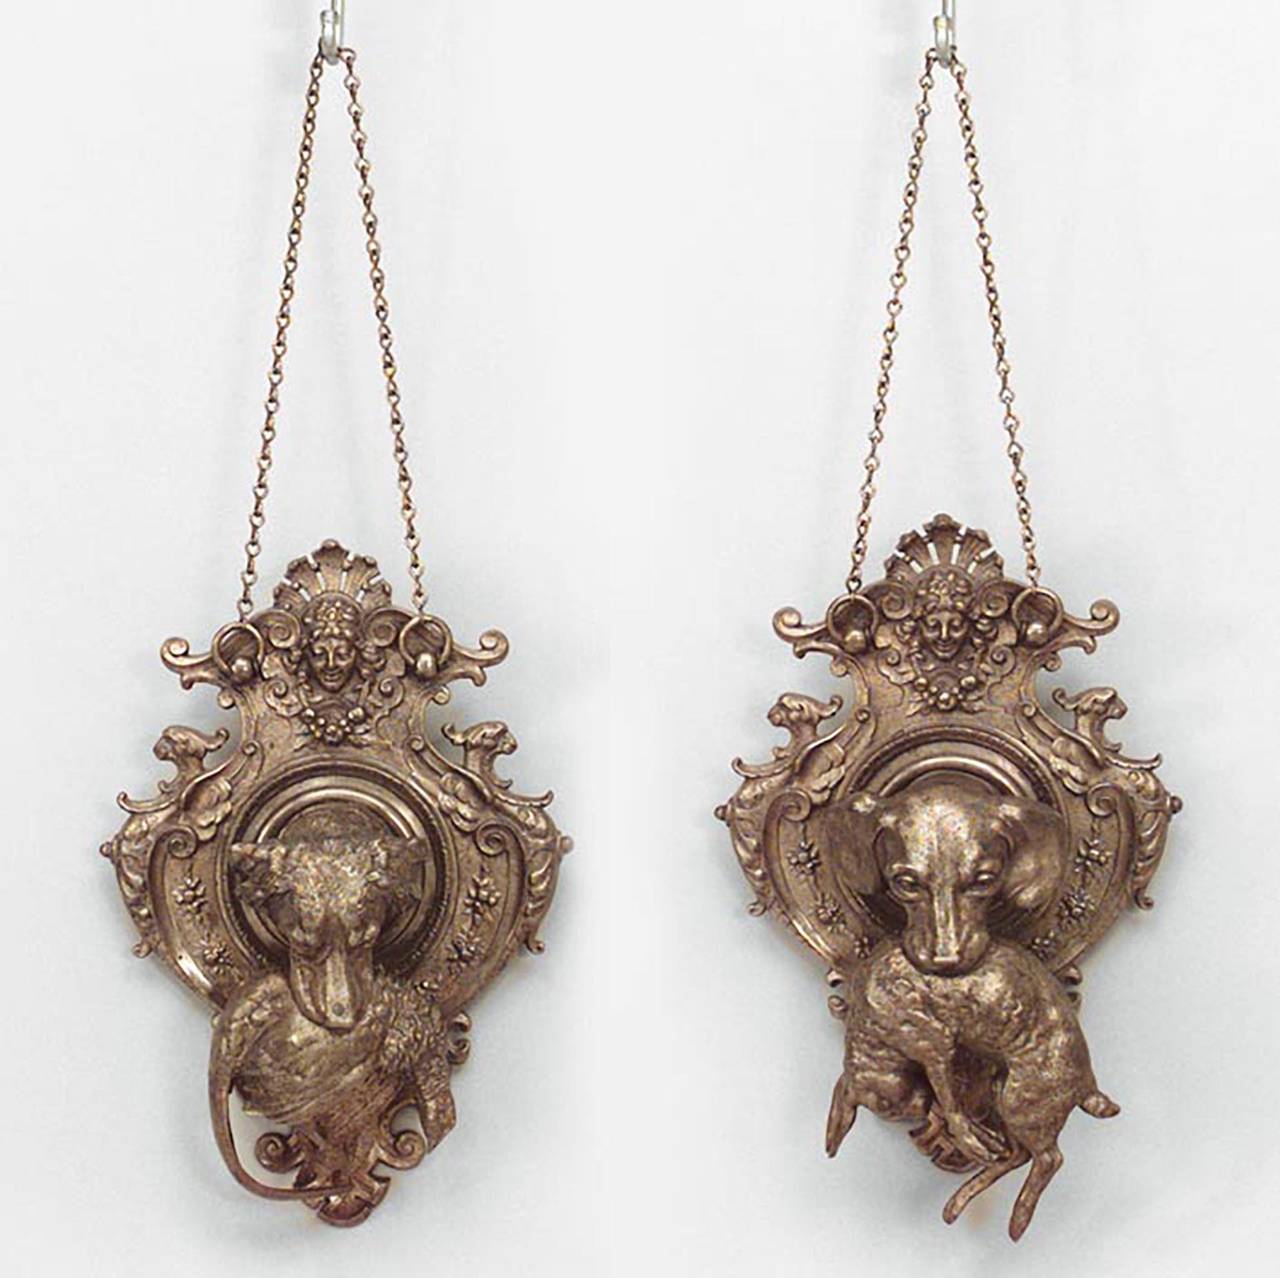 Pair of 19th century French shaped bronze wall plaques, each showing dogs' head holding game in its mouth, a bird and rabbit, respectively.